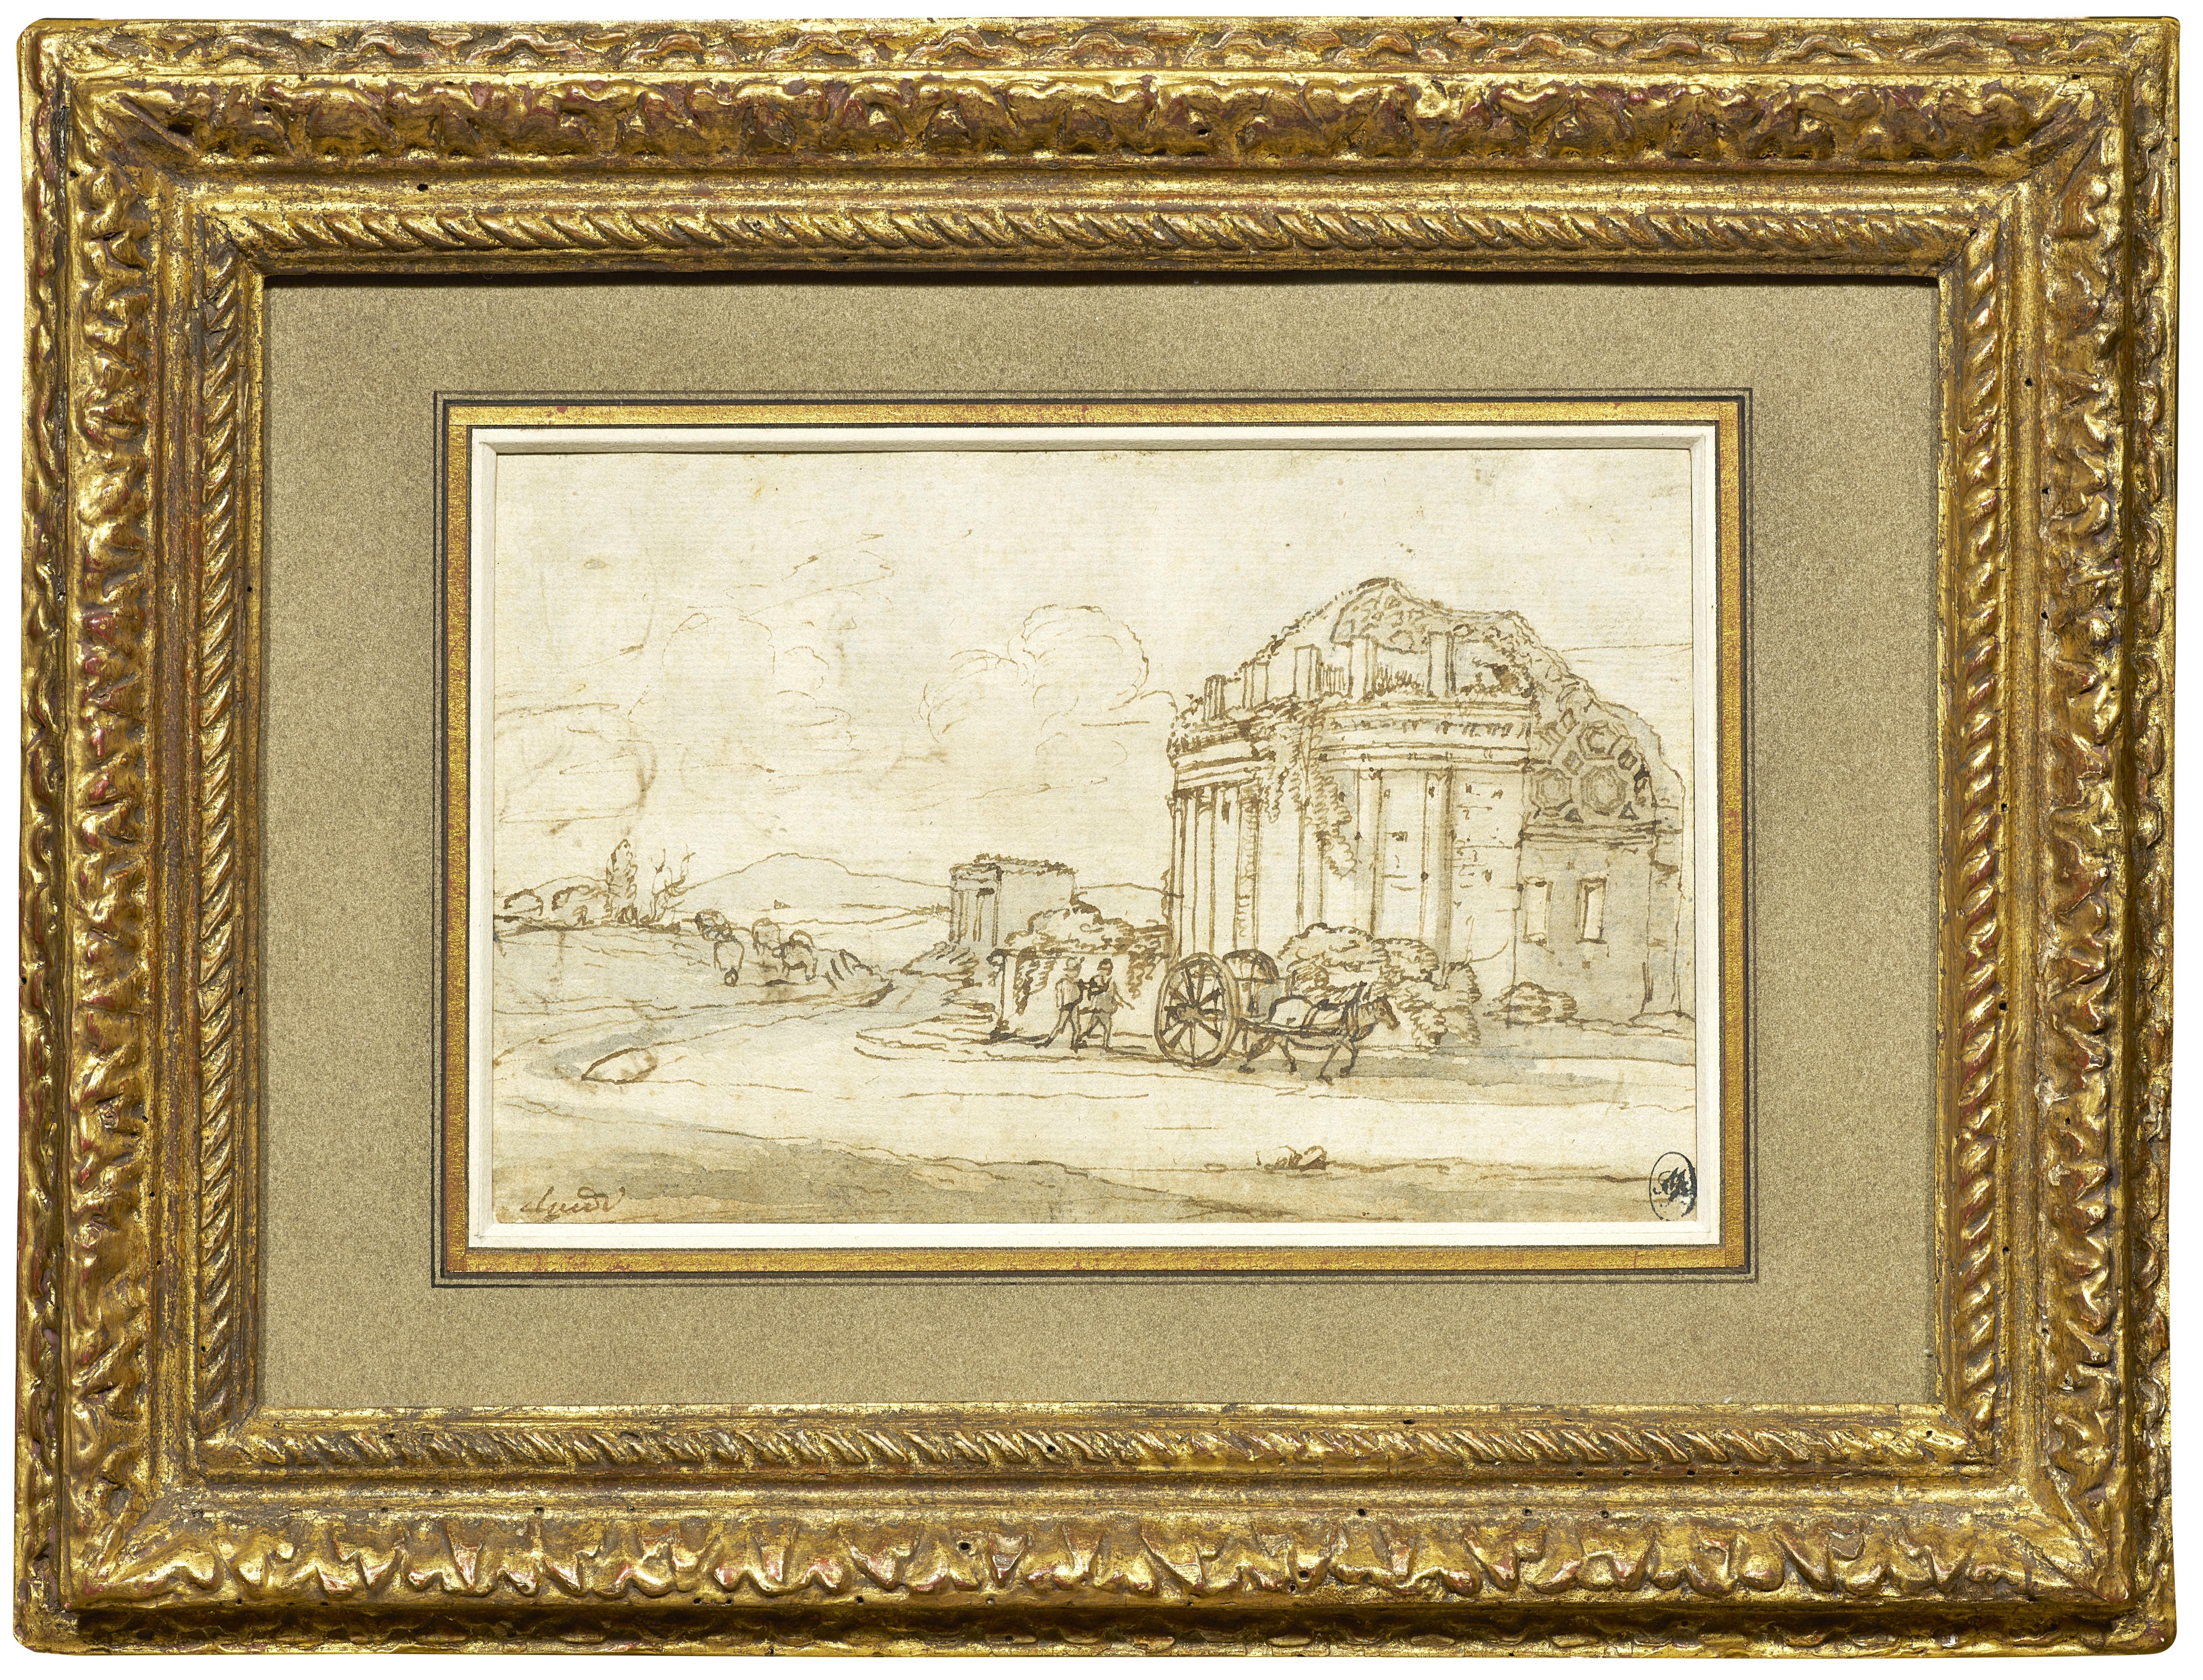 A landscape drawing by Claude Lorrain, with a preliminary sketch on the verso